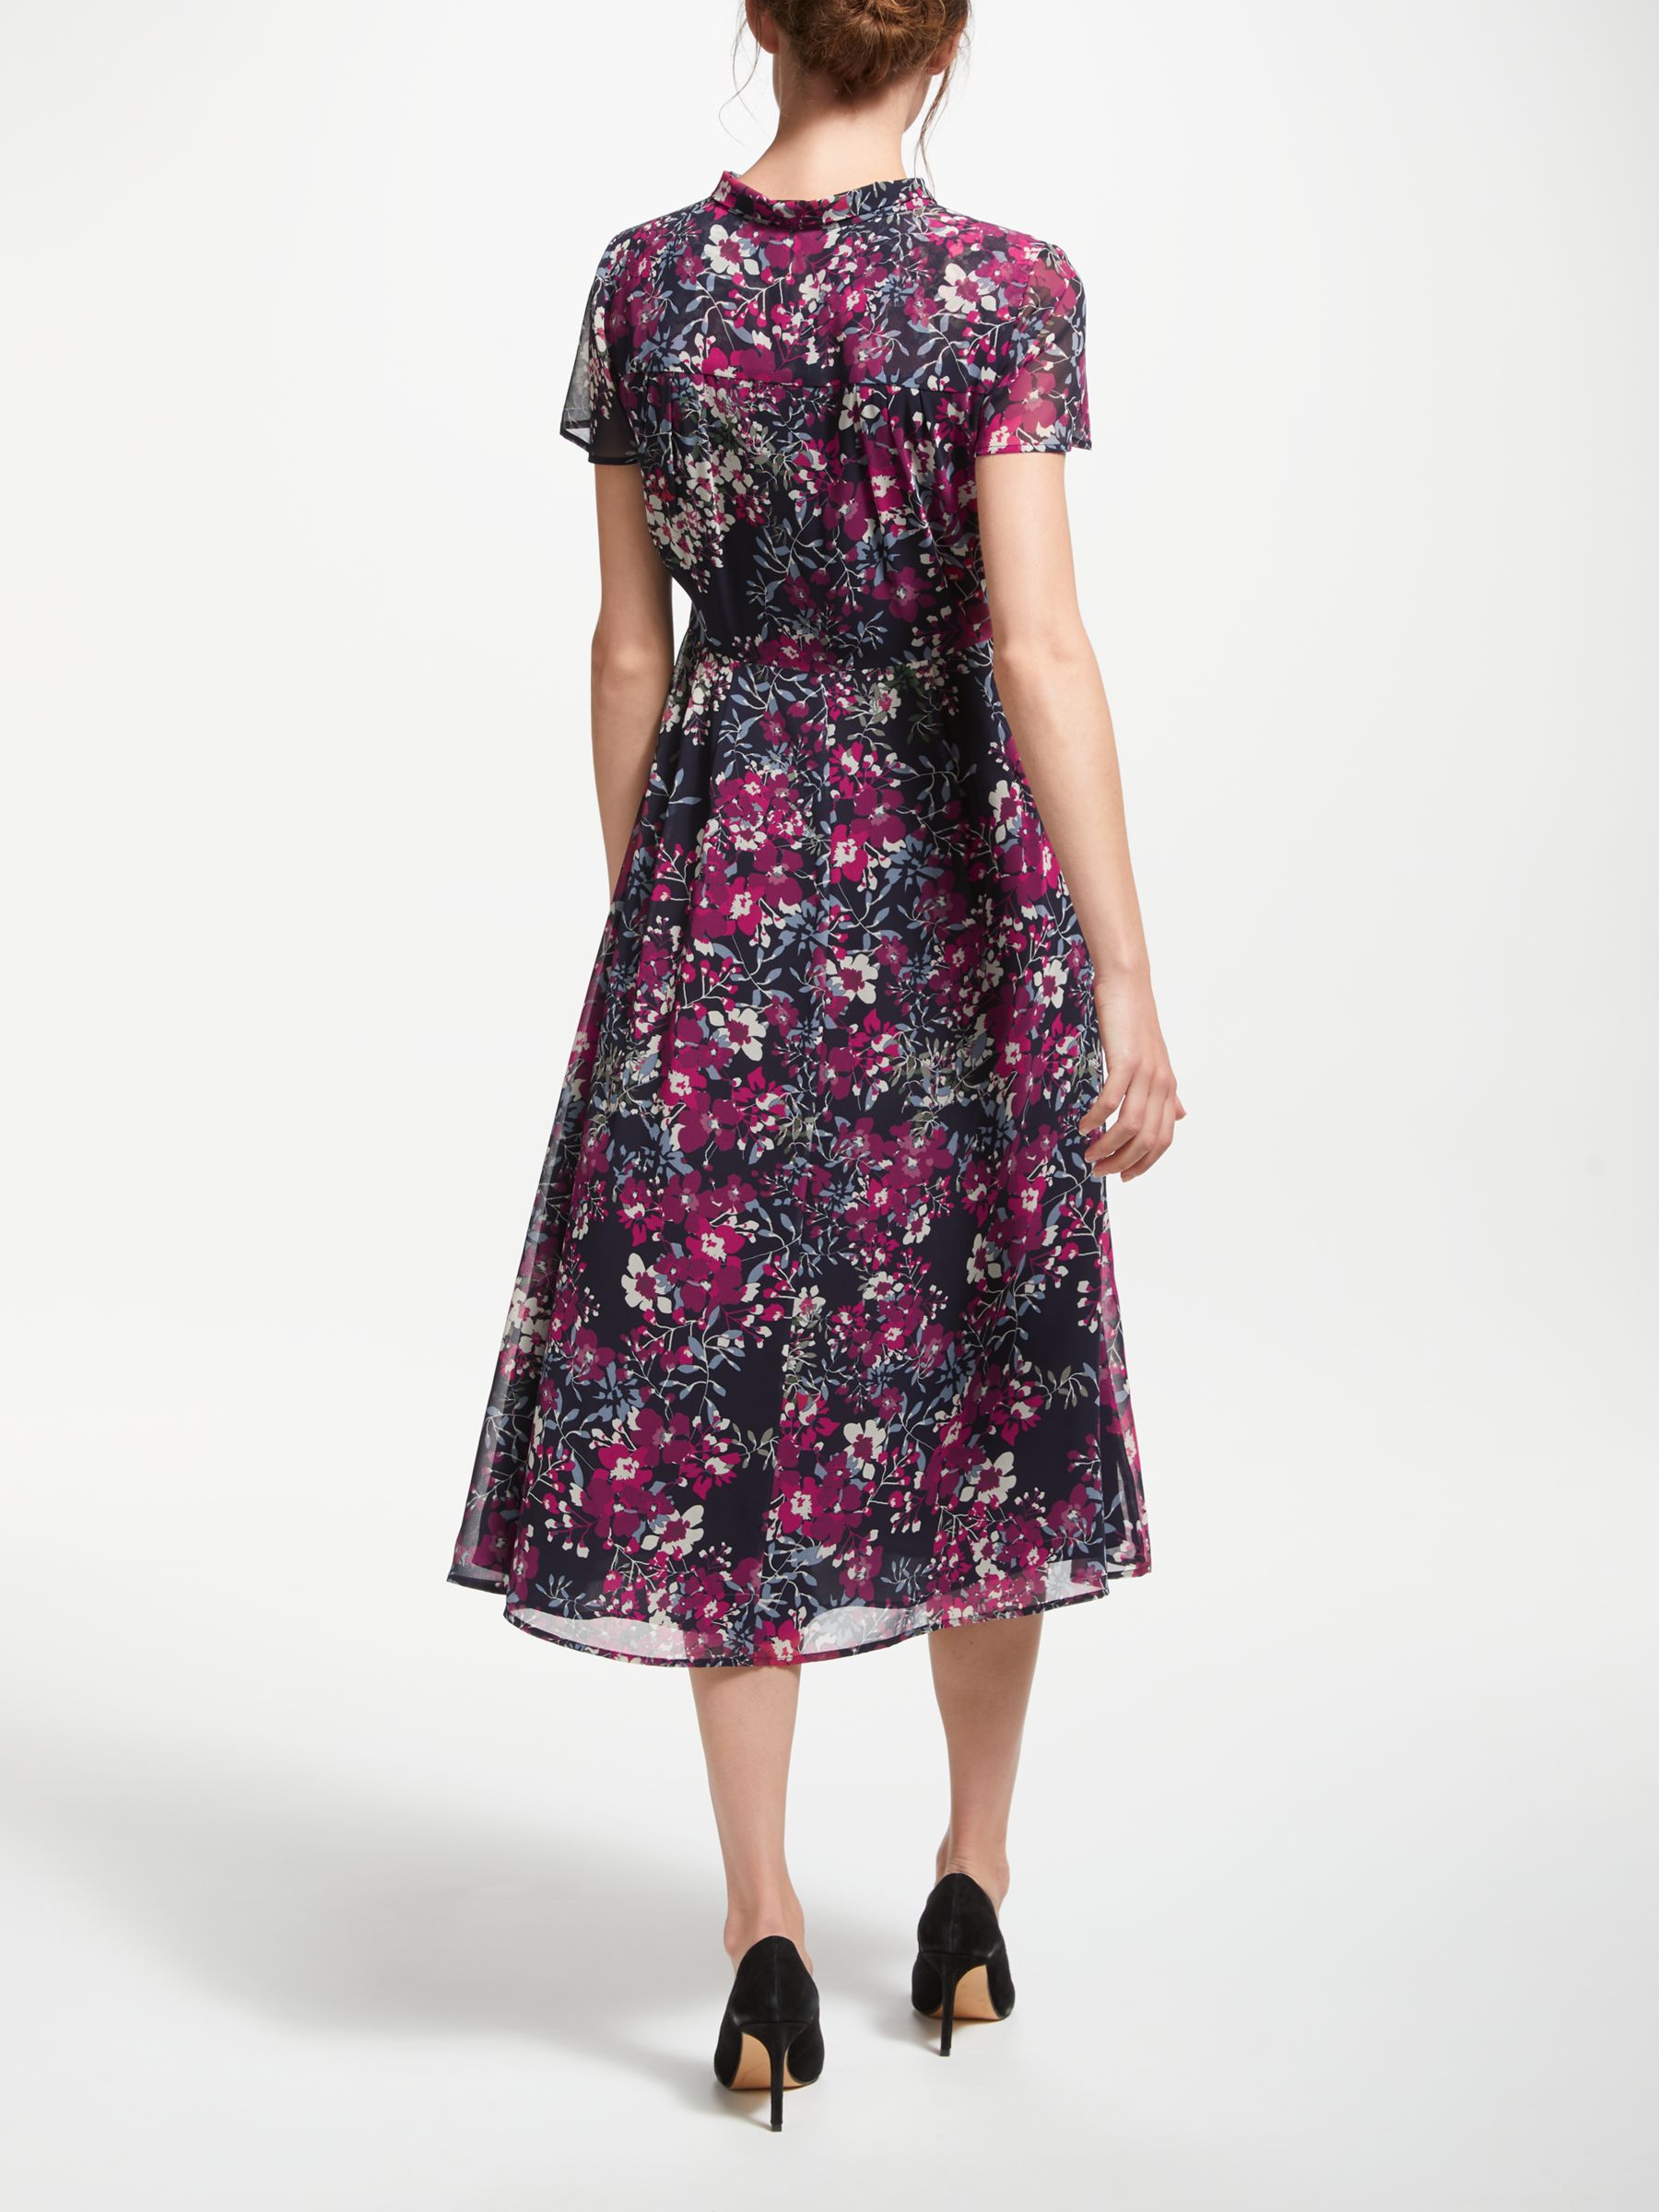 Bruce by Bruce Oldfield Floral Shirt Dress, Navy Print